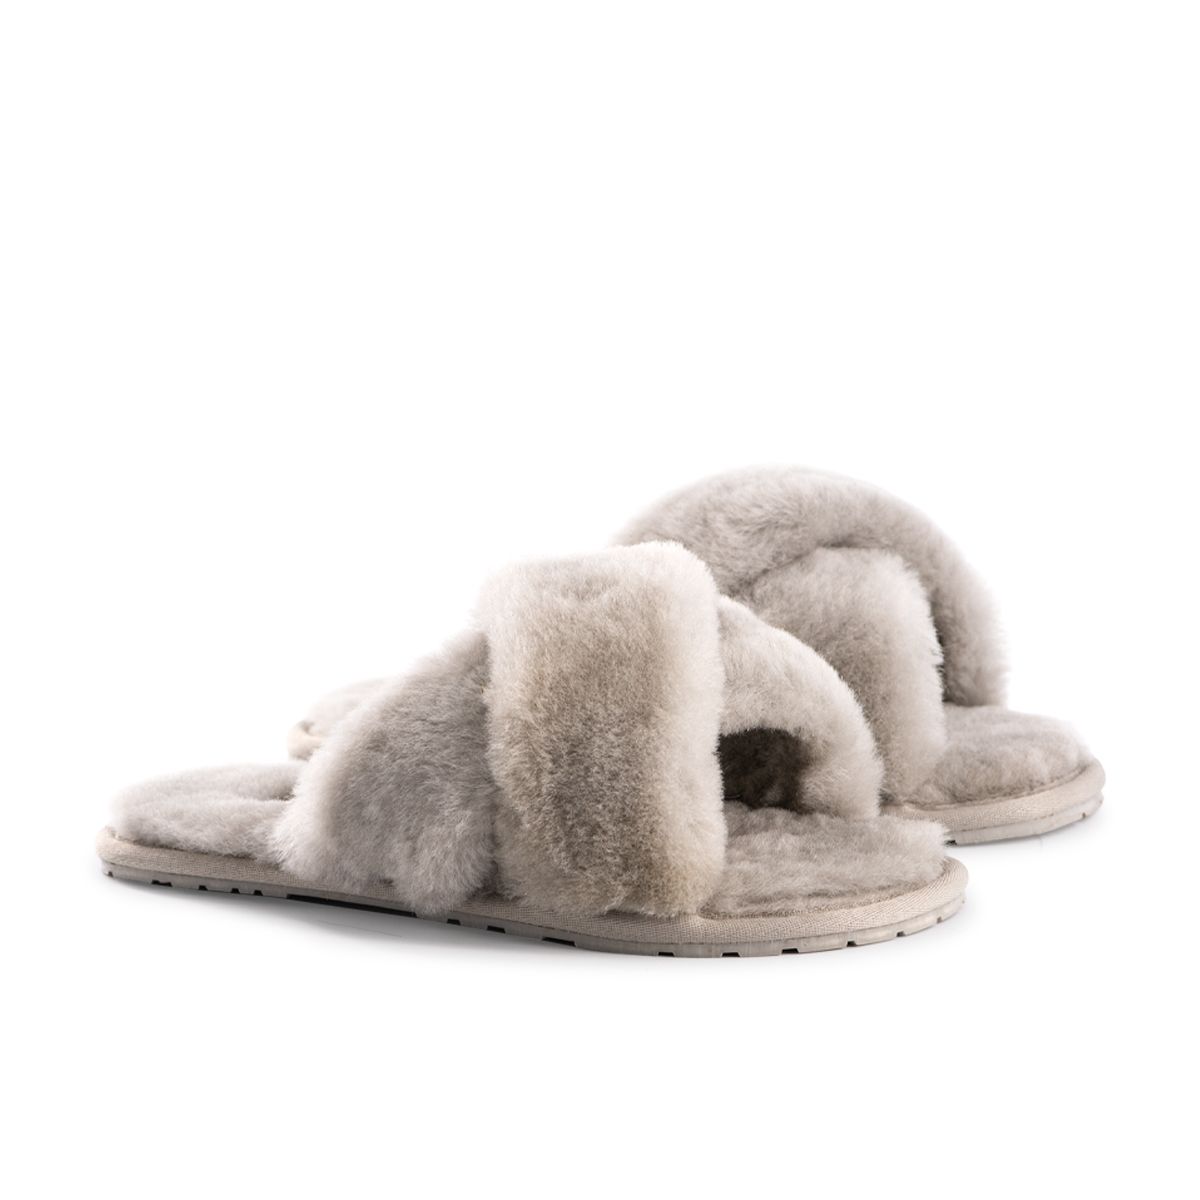 Soft premium genuine Australian Sheepskin wool upper
 Easy to slide on footwear used in any weather
 Full premium sheepskin insole
 Cross over style strap giving a great fit
 Soft Rubber outsole – highly durable and lightweight
 Stylish, Fluffy and cosy all at the same time
 100% brand new and high quality, comes in a branded box, suitable for gifting